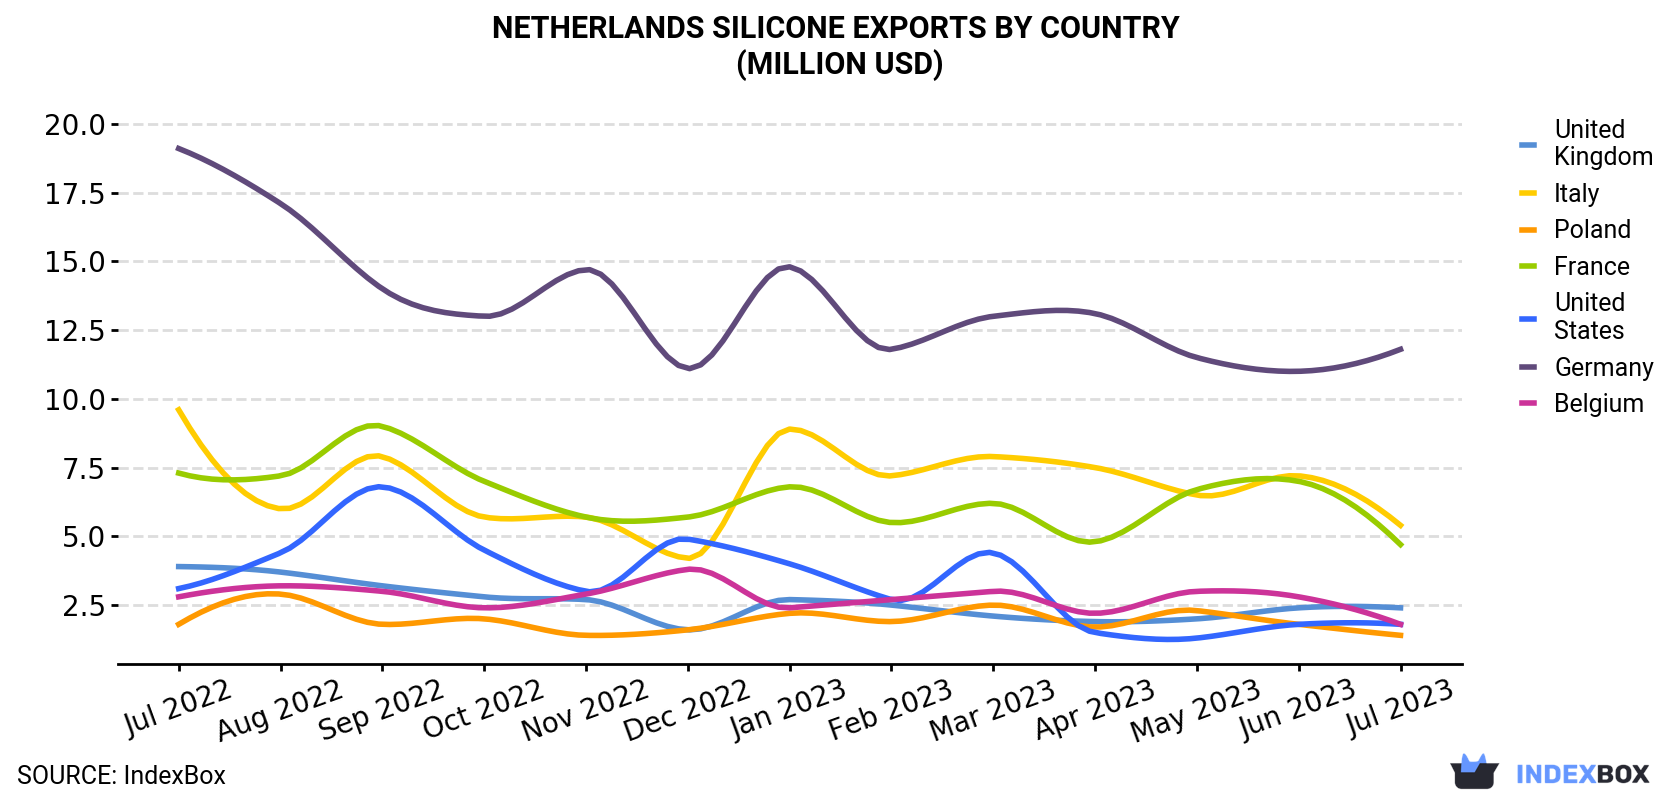 Netherlands Silicone Exports By Country (Million USD)